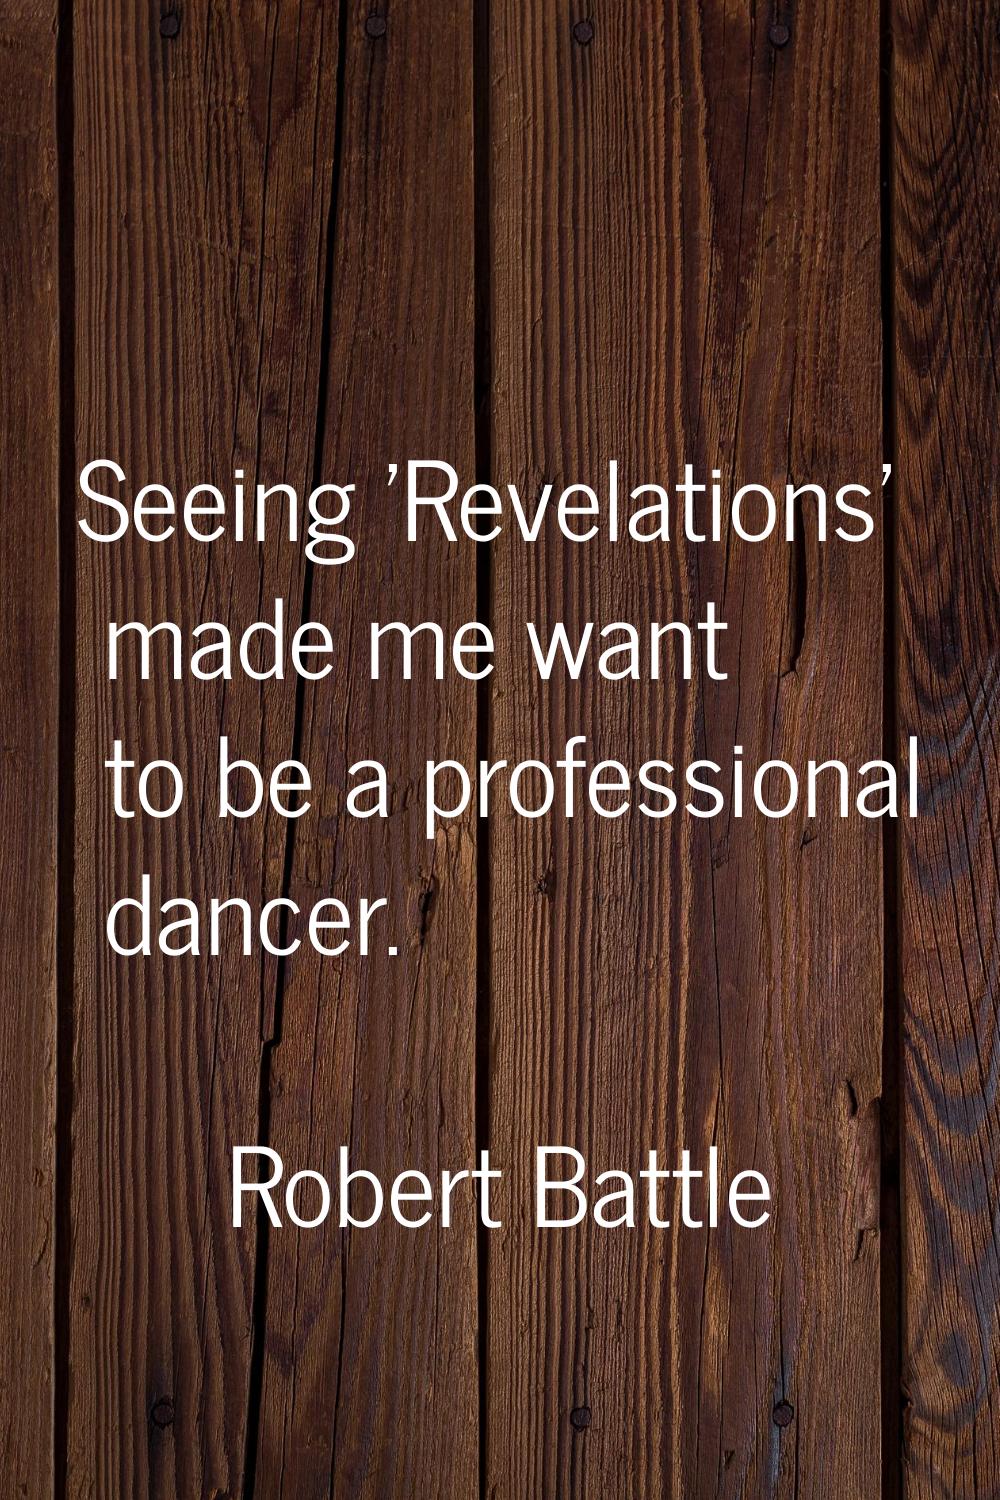 Seeing 'Revelations' made me want to be a professional dancer.